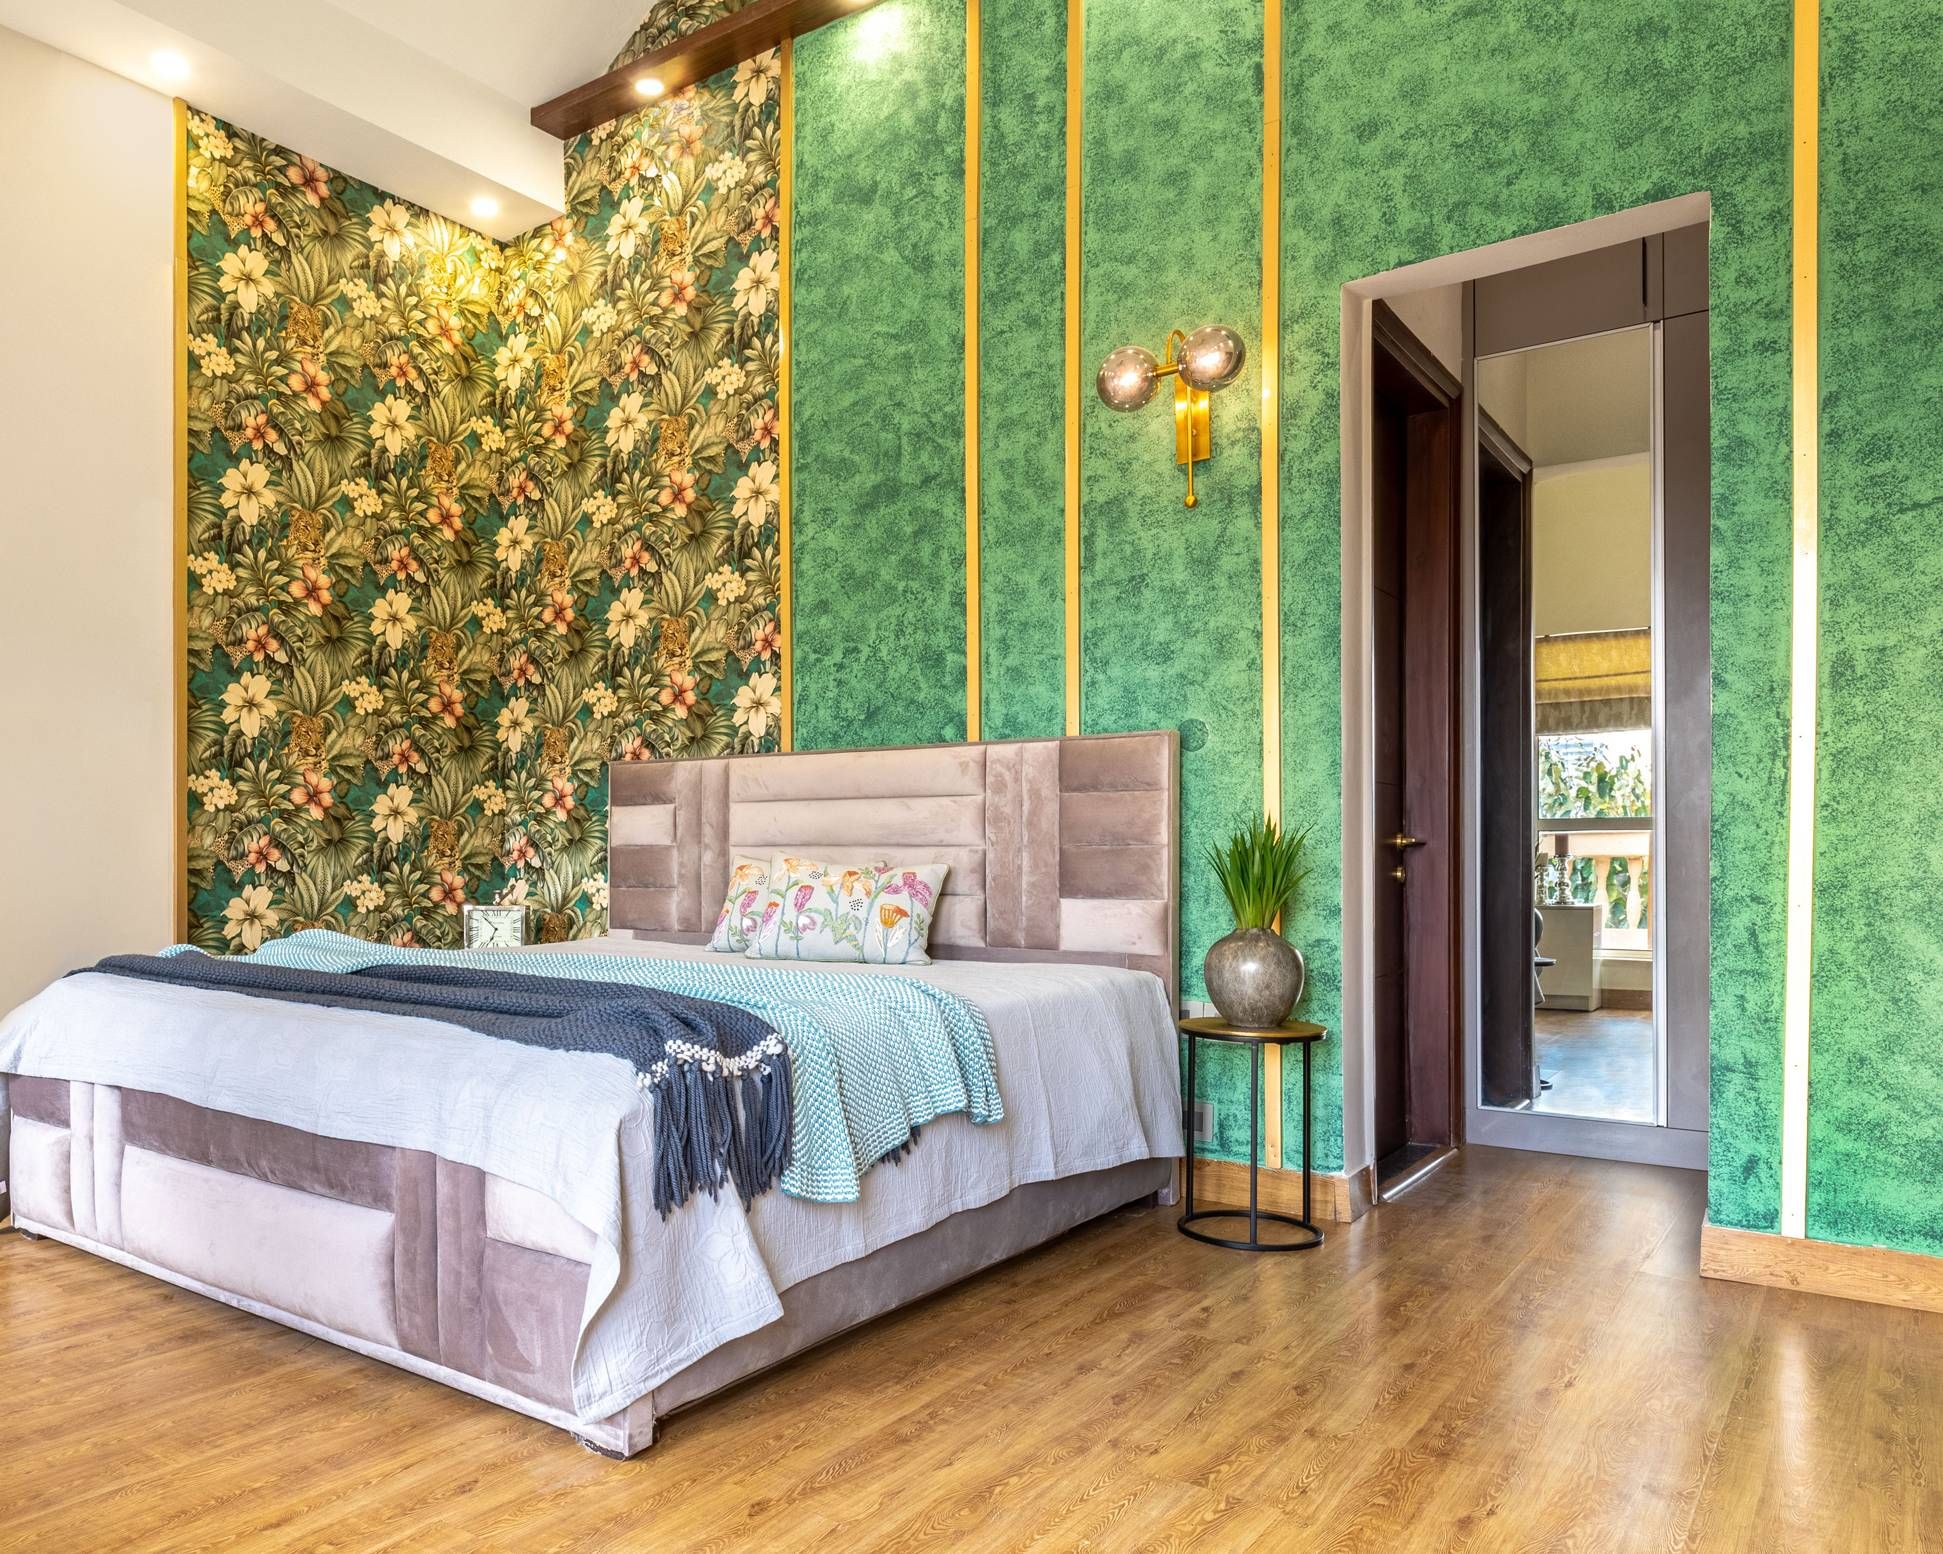 Contemporary Green Bedroom Wallpaper Design With Gold Inlays